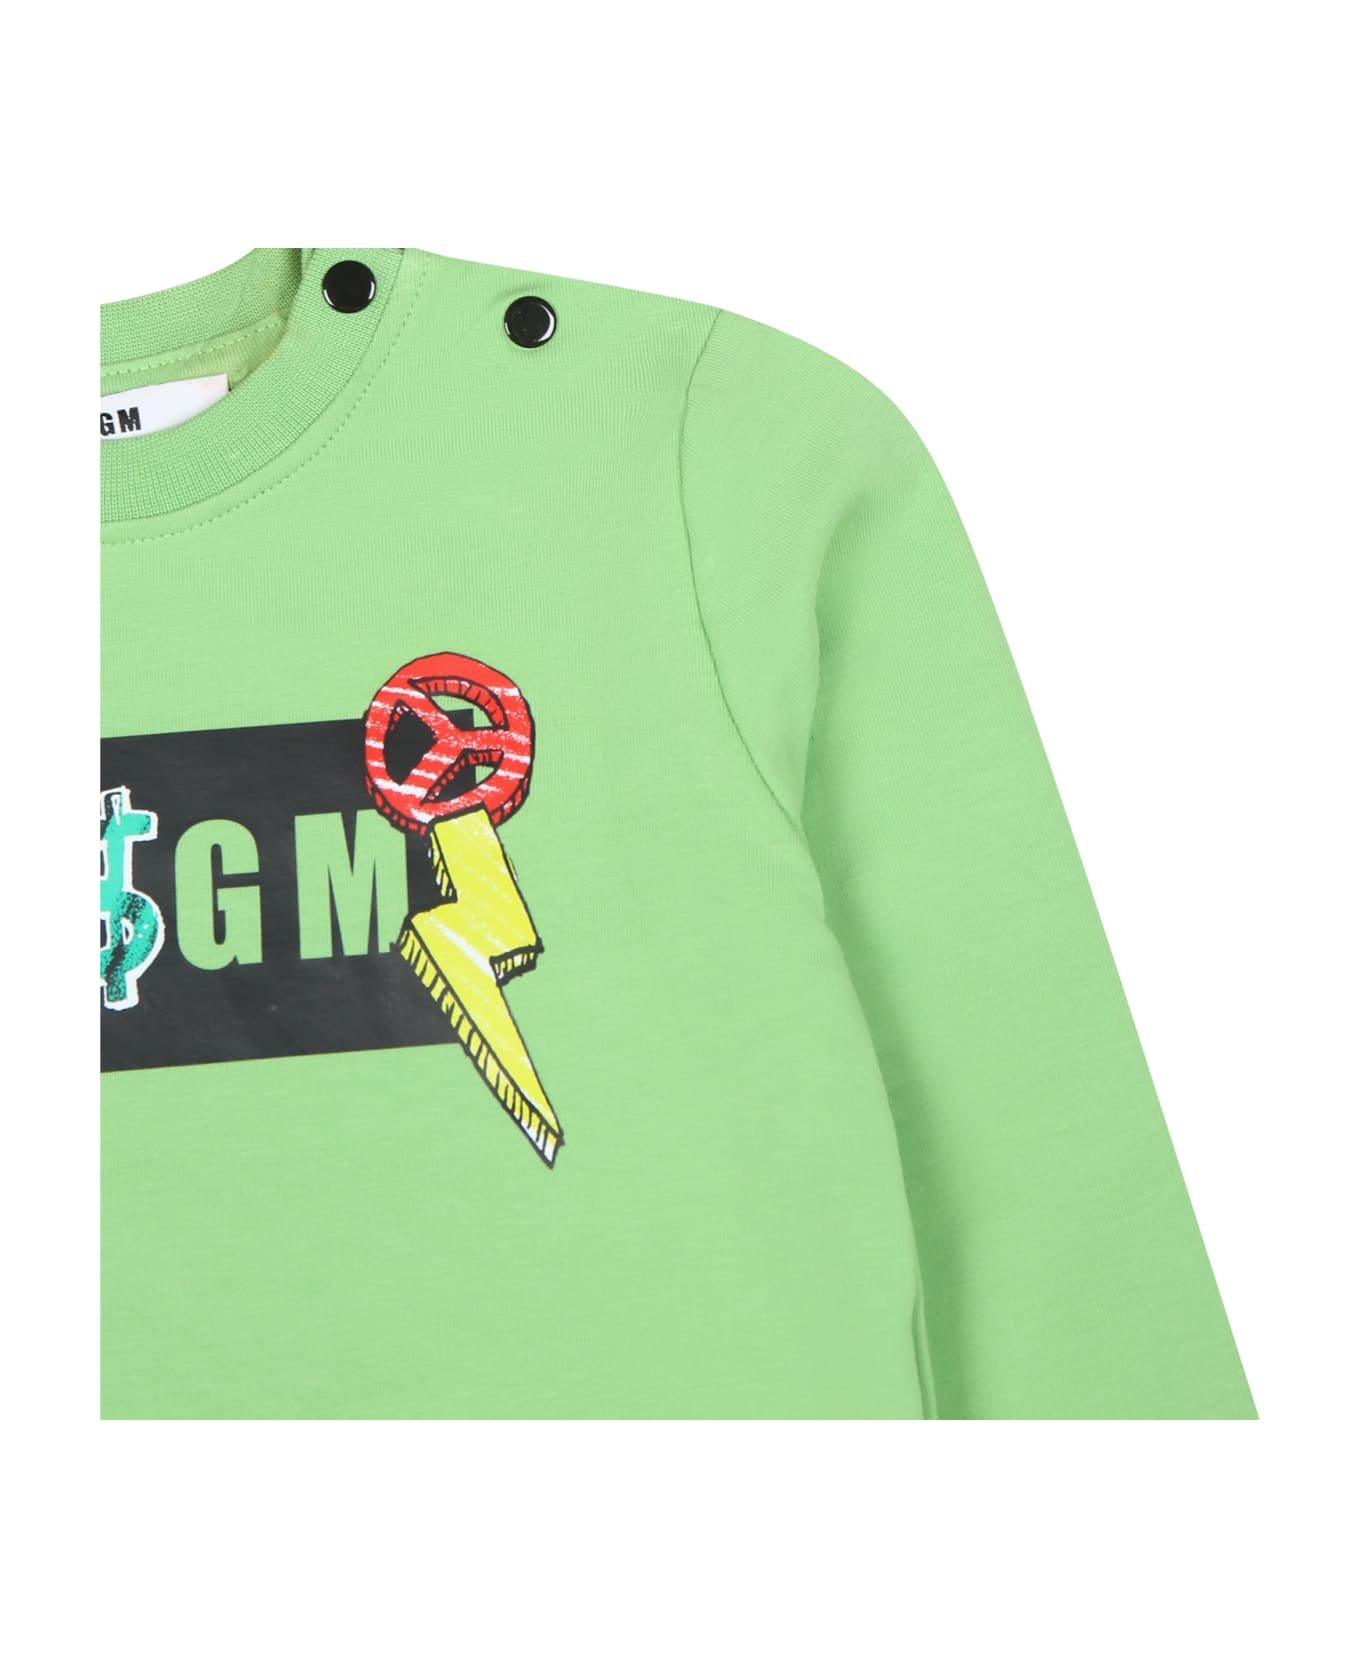 MSGM Green Sweatshirt For Baby Boy With Logo And Print - Green